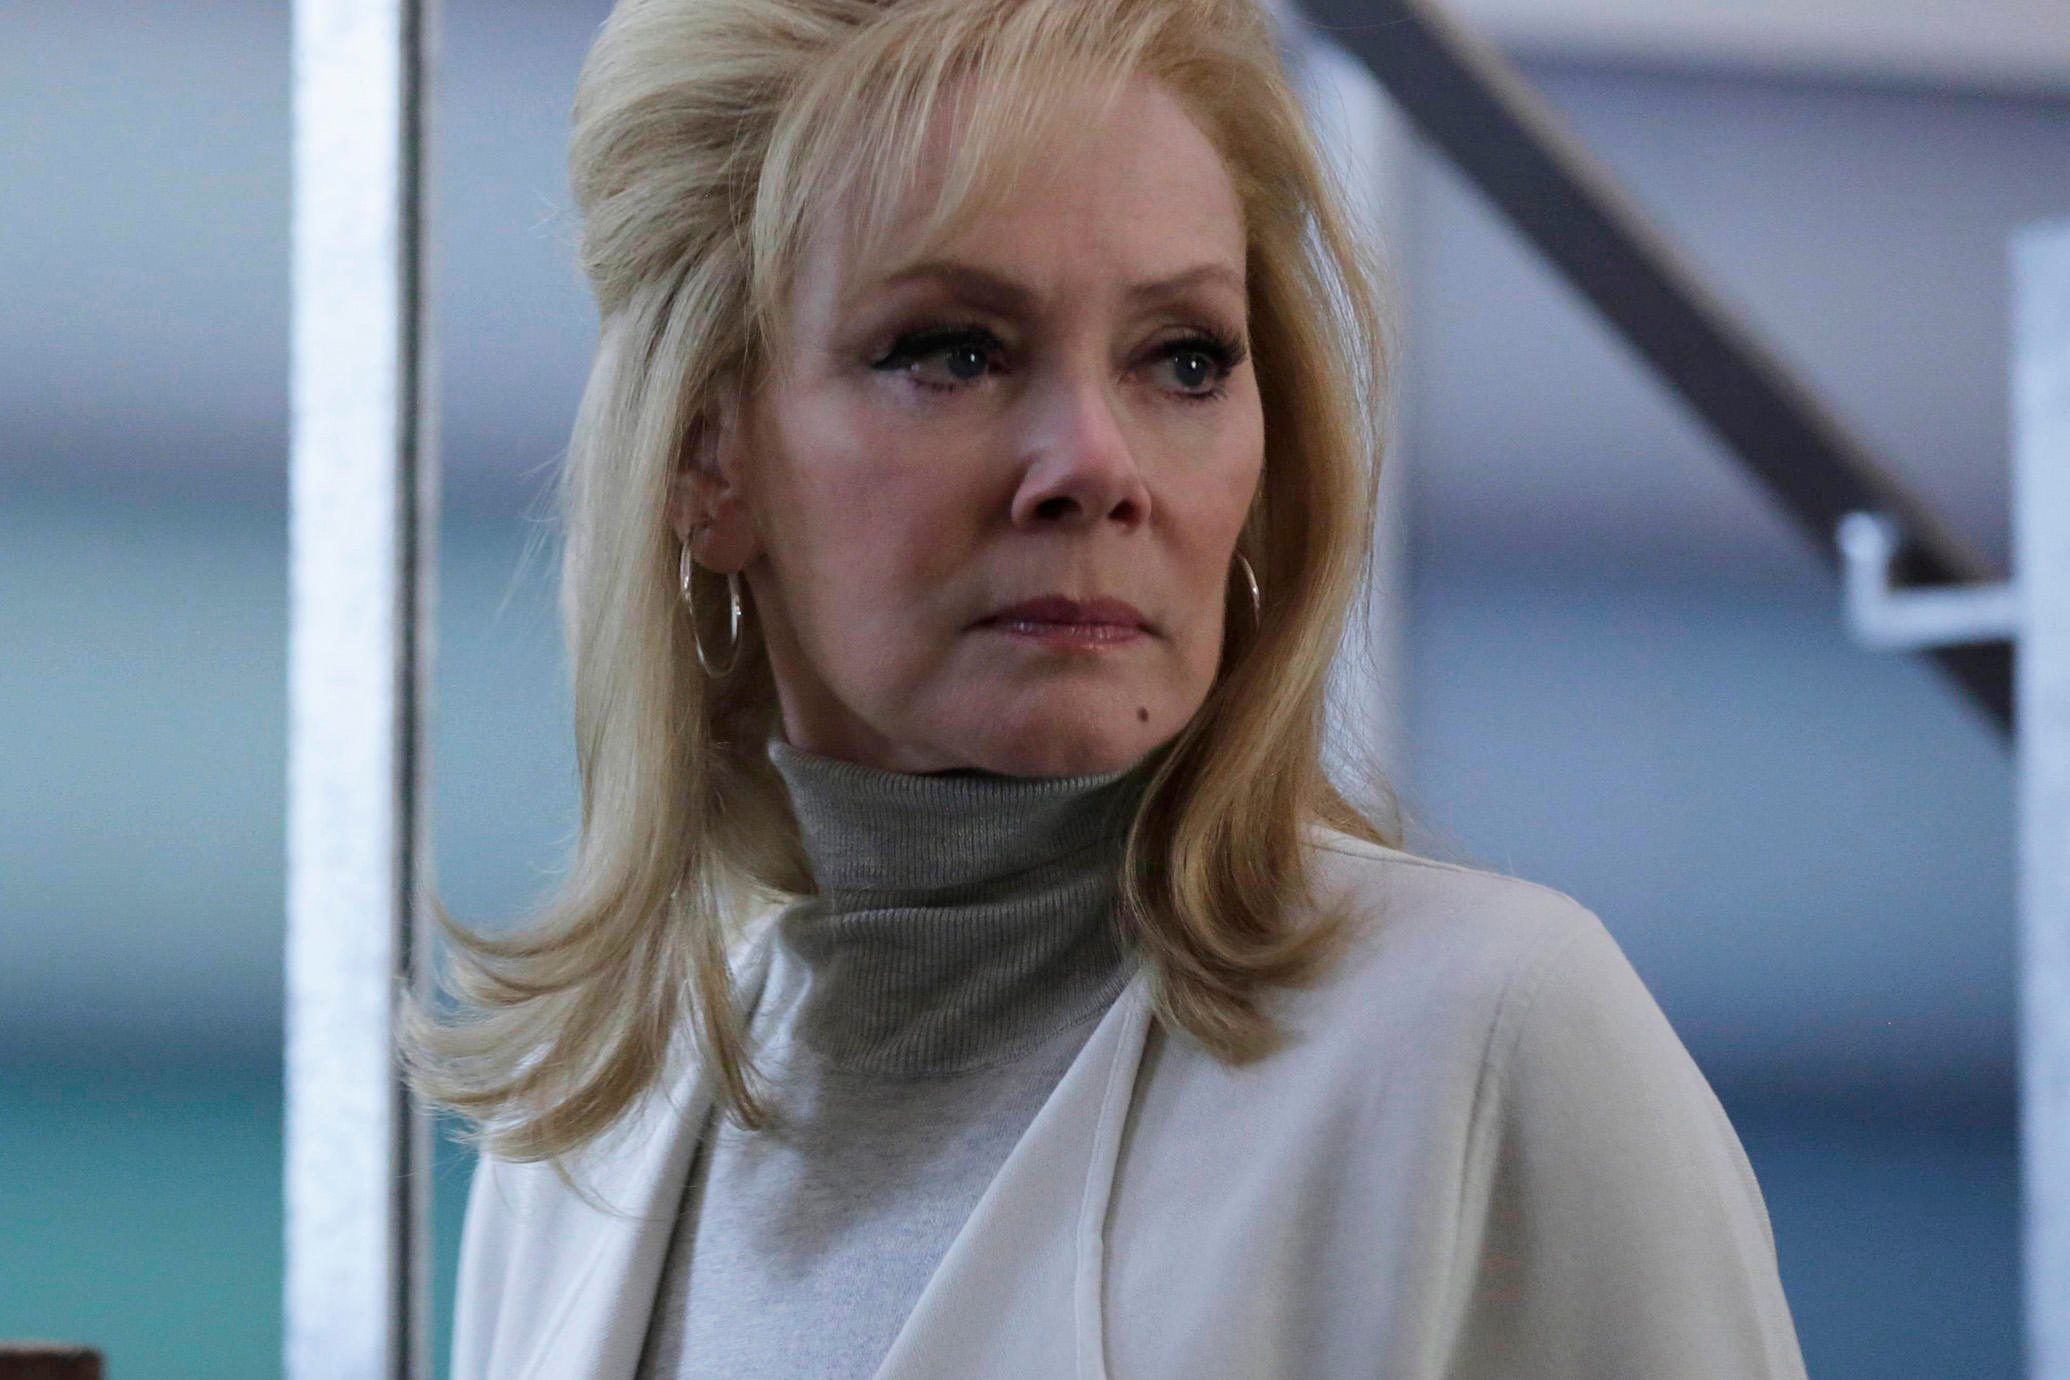 Jean Smart To Star In New Limited Series Based On New York Times Article 'Love Letter: When My Grandmother Stopped Eating'